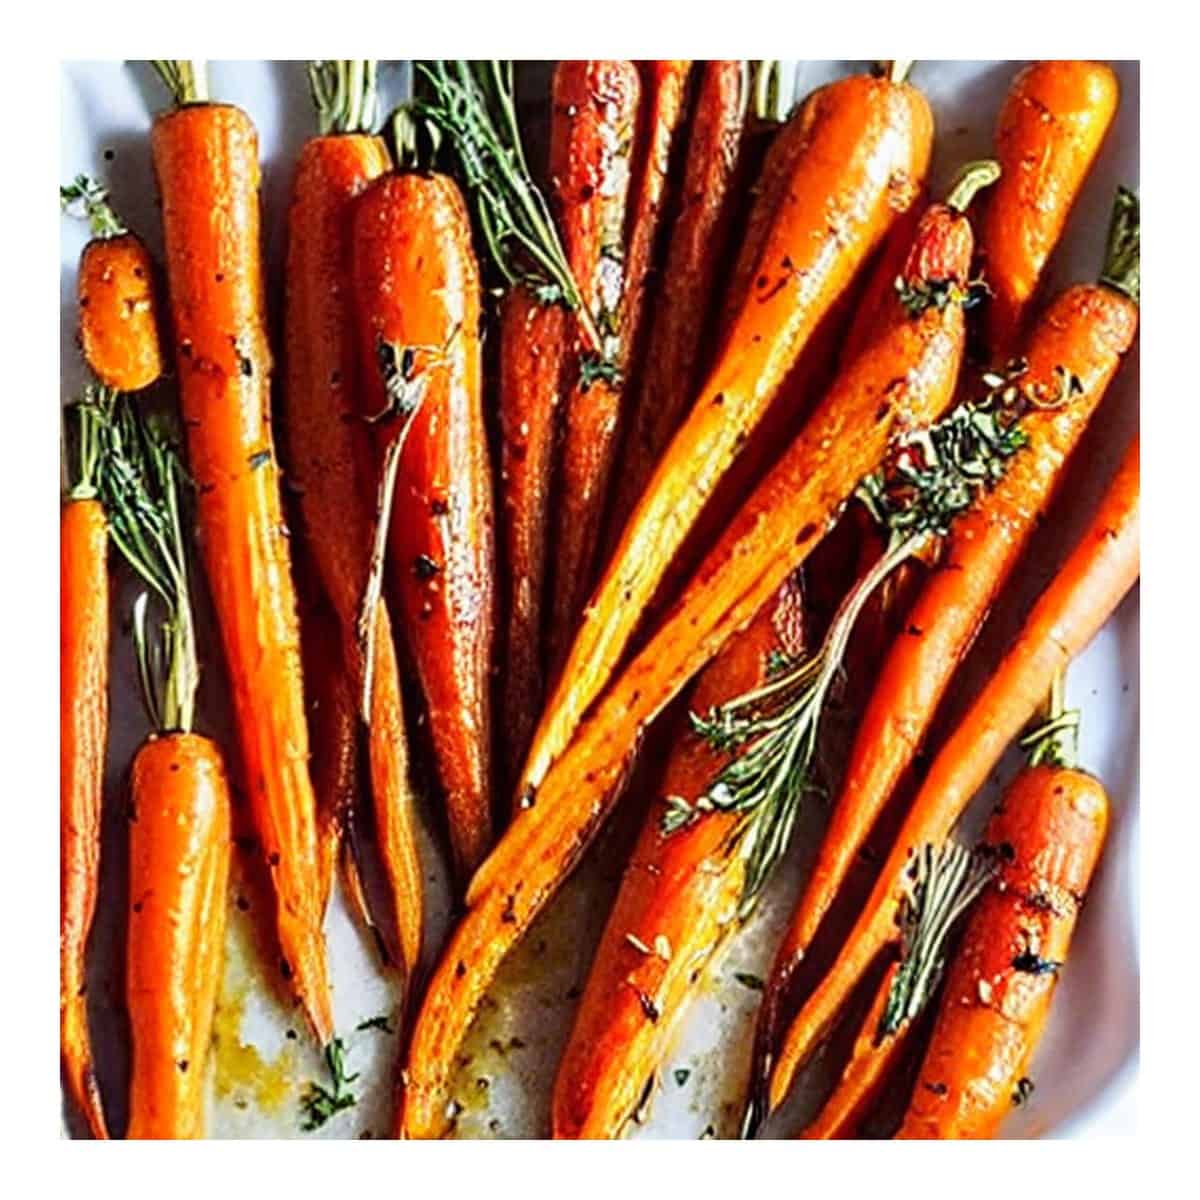 Honey And Herb Oven Roasted Carrots